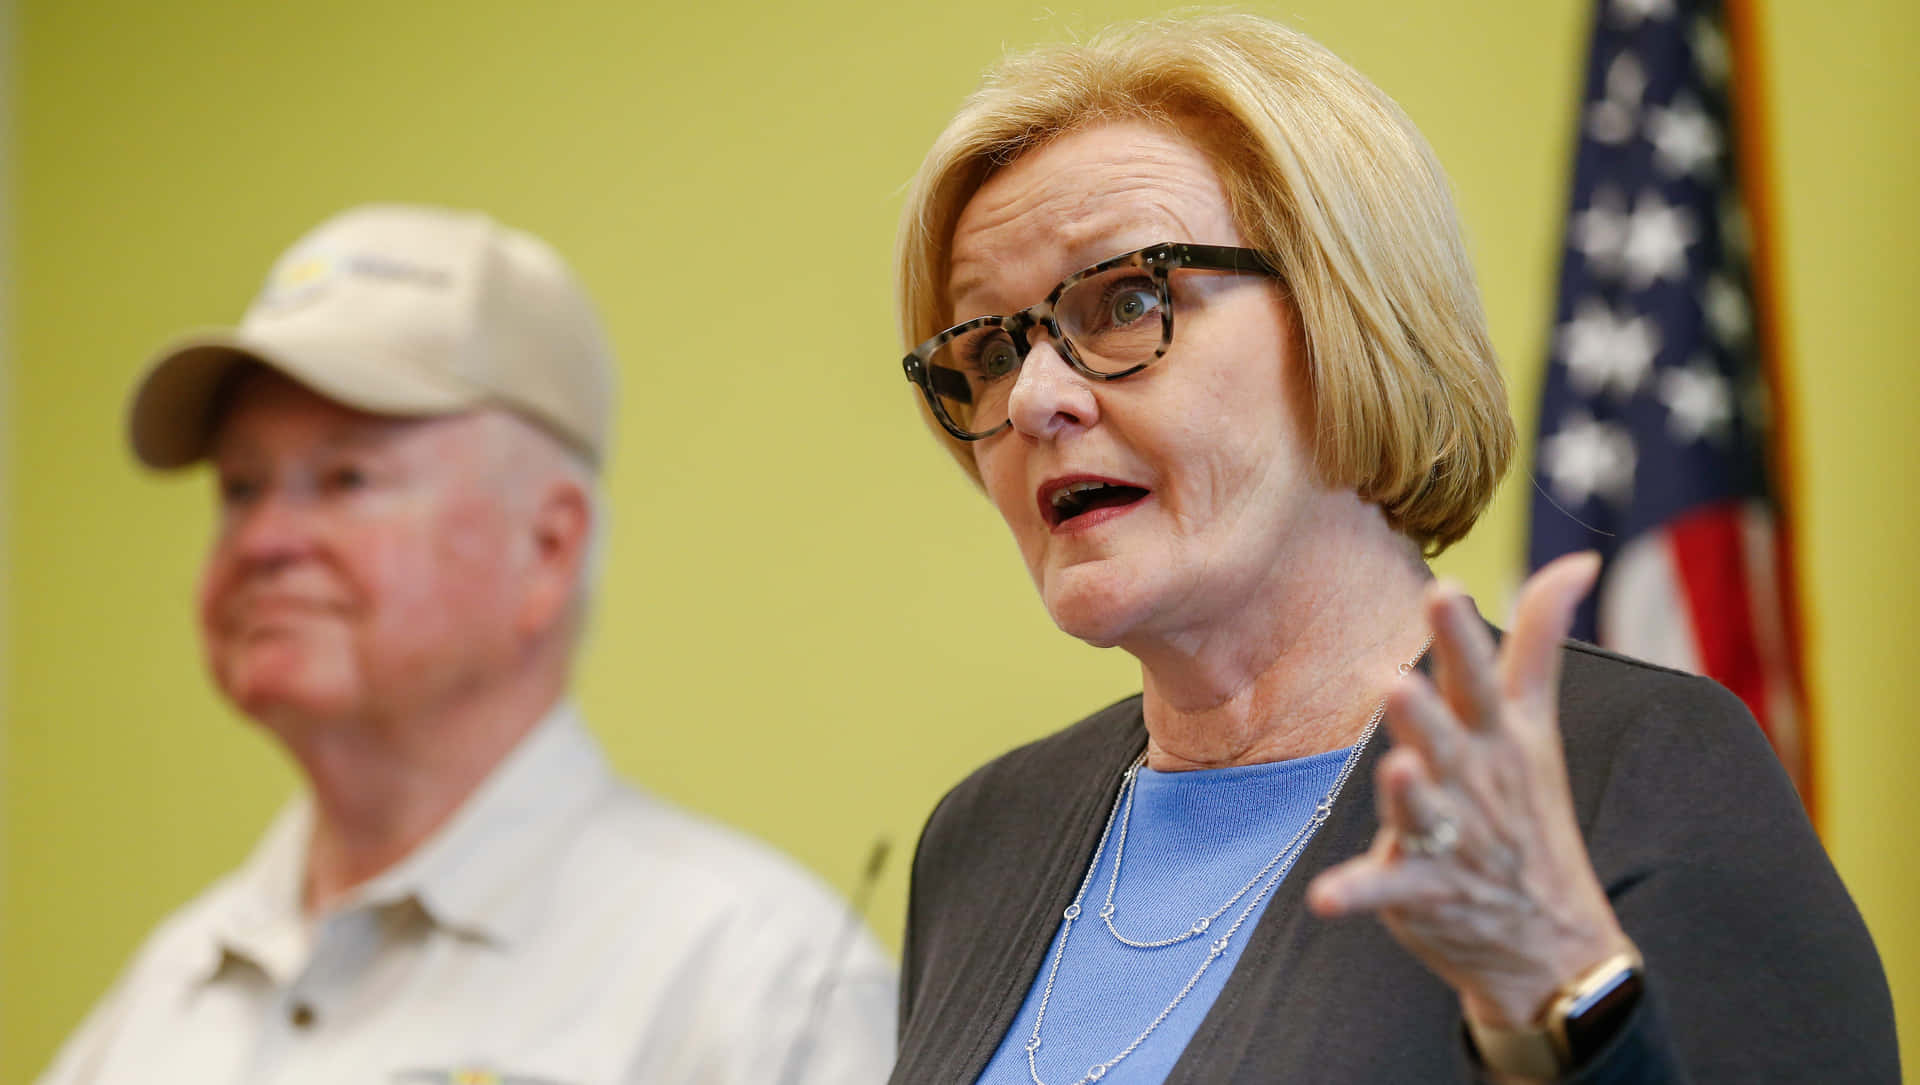 Claire Mccaskill During Press Conference Wallpaper